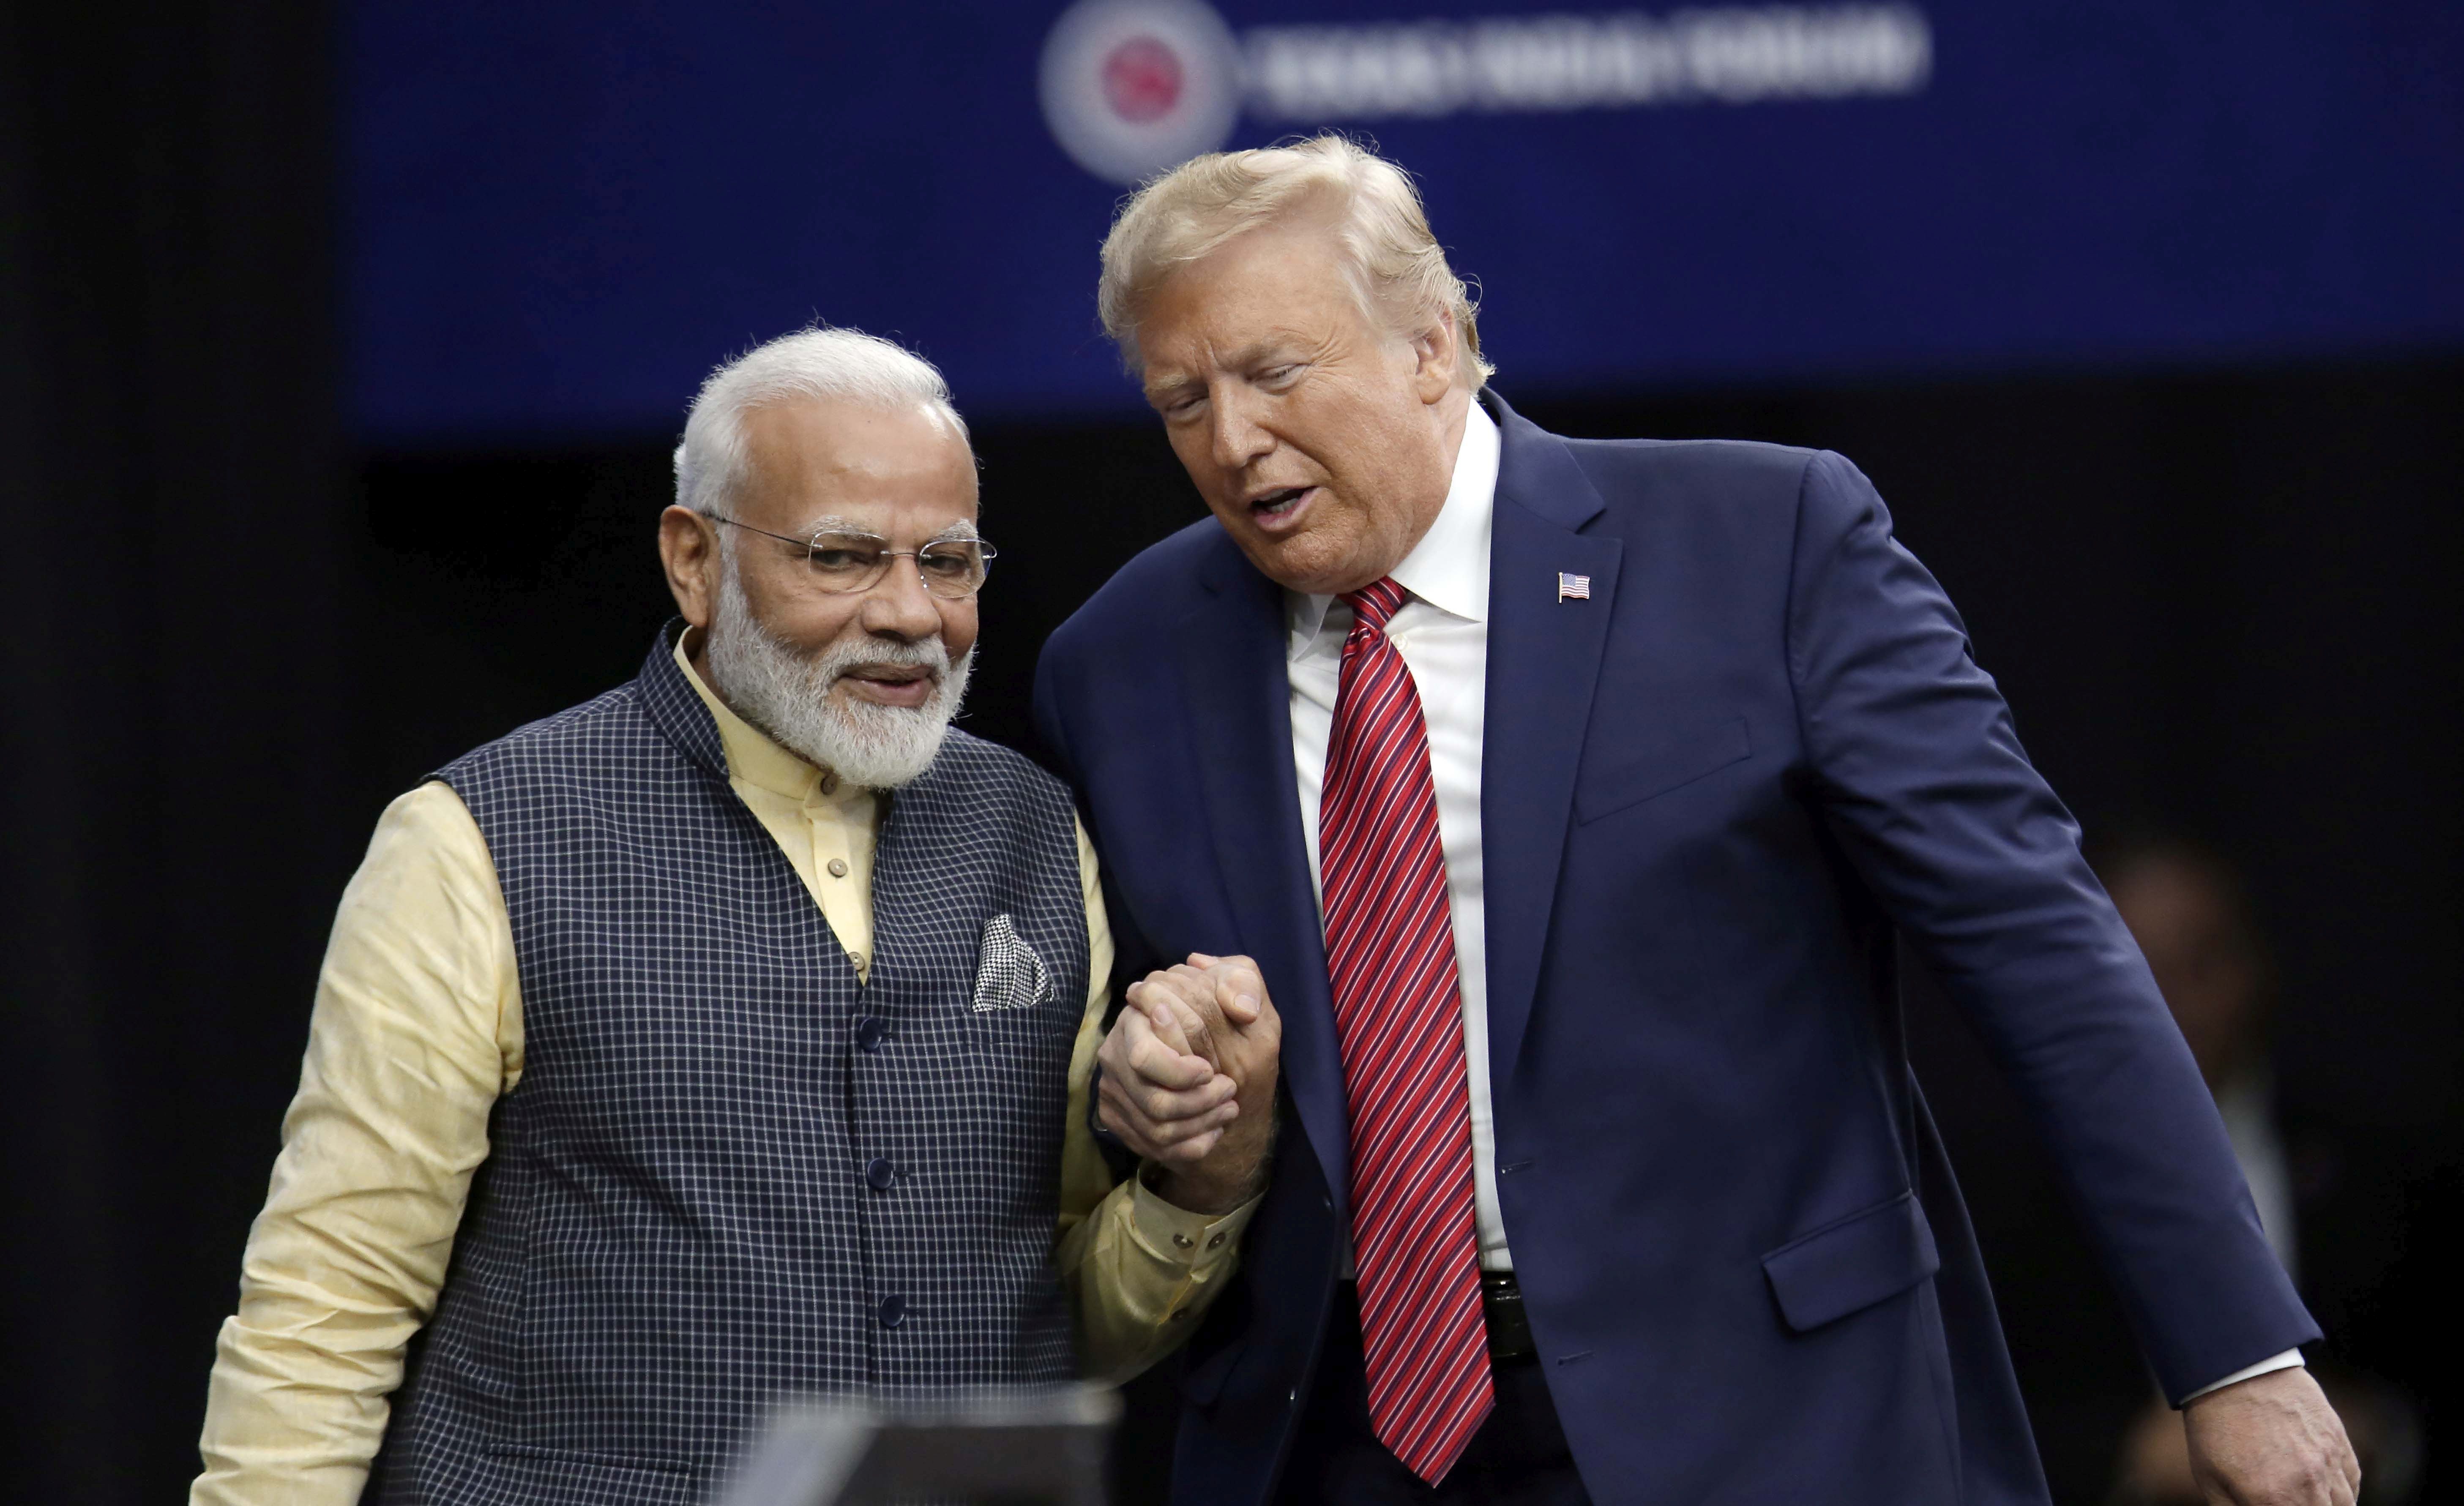 Trump will raise issue of religious freedom with Modi: White House